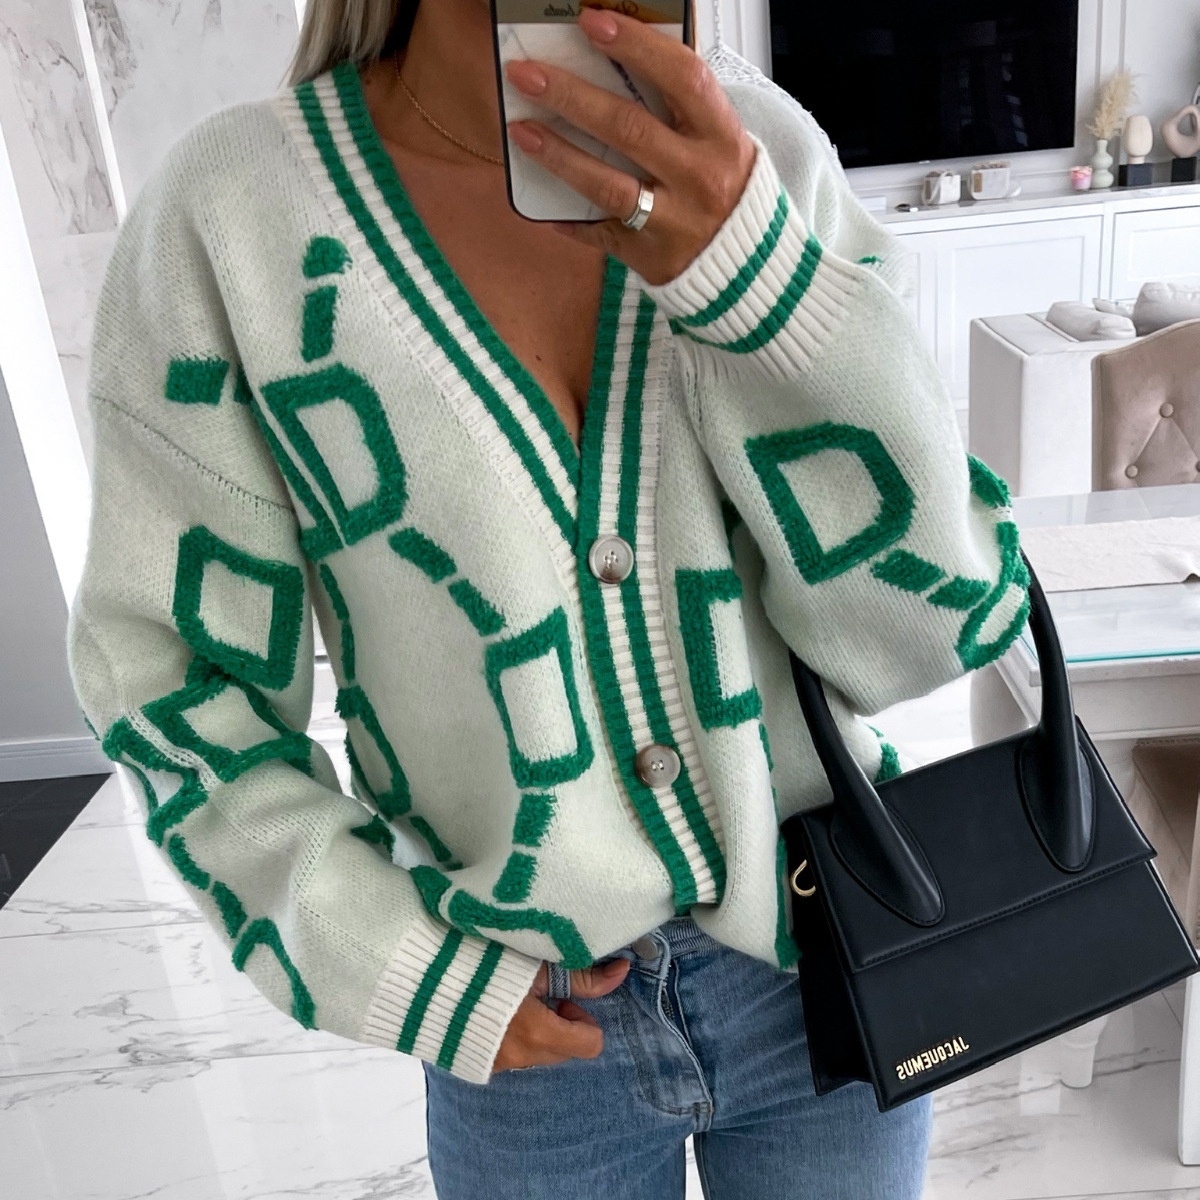 High Contrast Knit Cardigan, V-Neck Button Up Cardigan Sweater, Casual Tops For Fall & Winter, Women's Clothing - White, XL